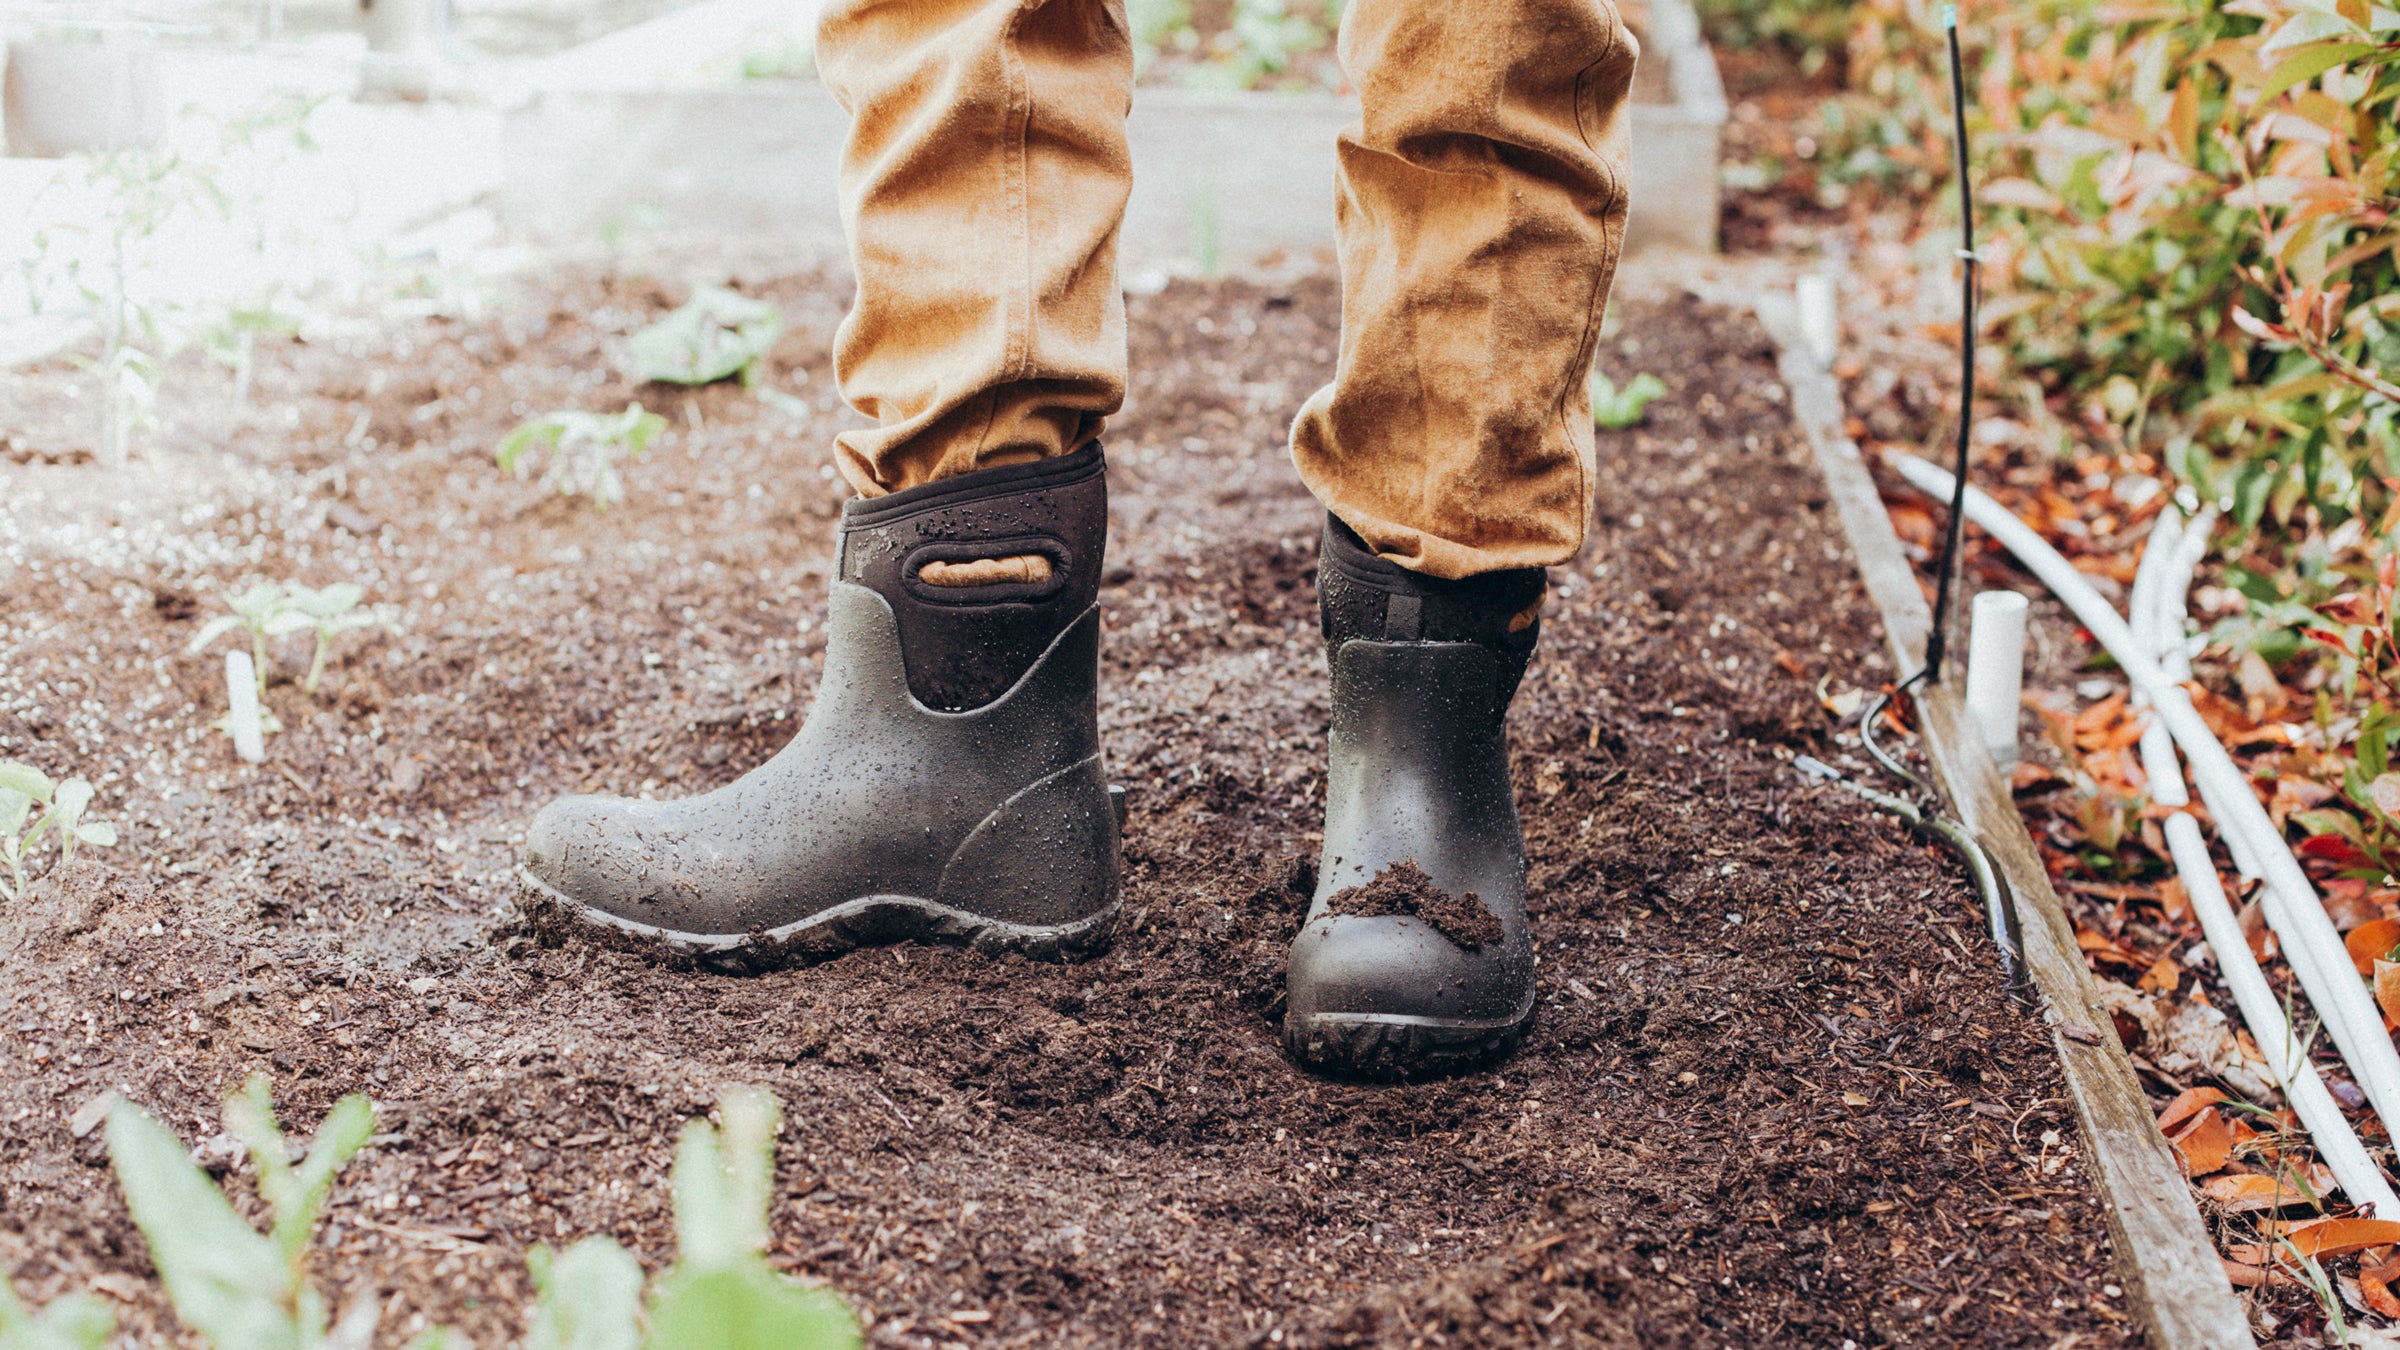 Keep dirt, water, mud and muck outside where they belong. Our